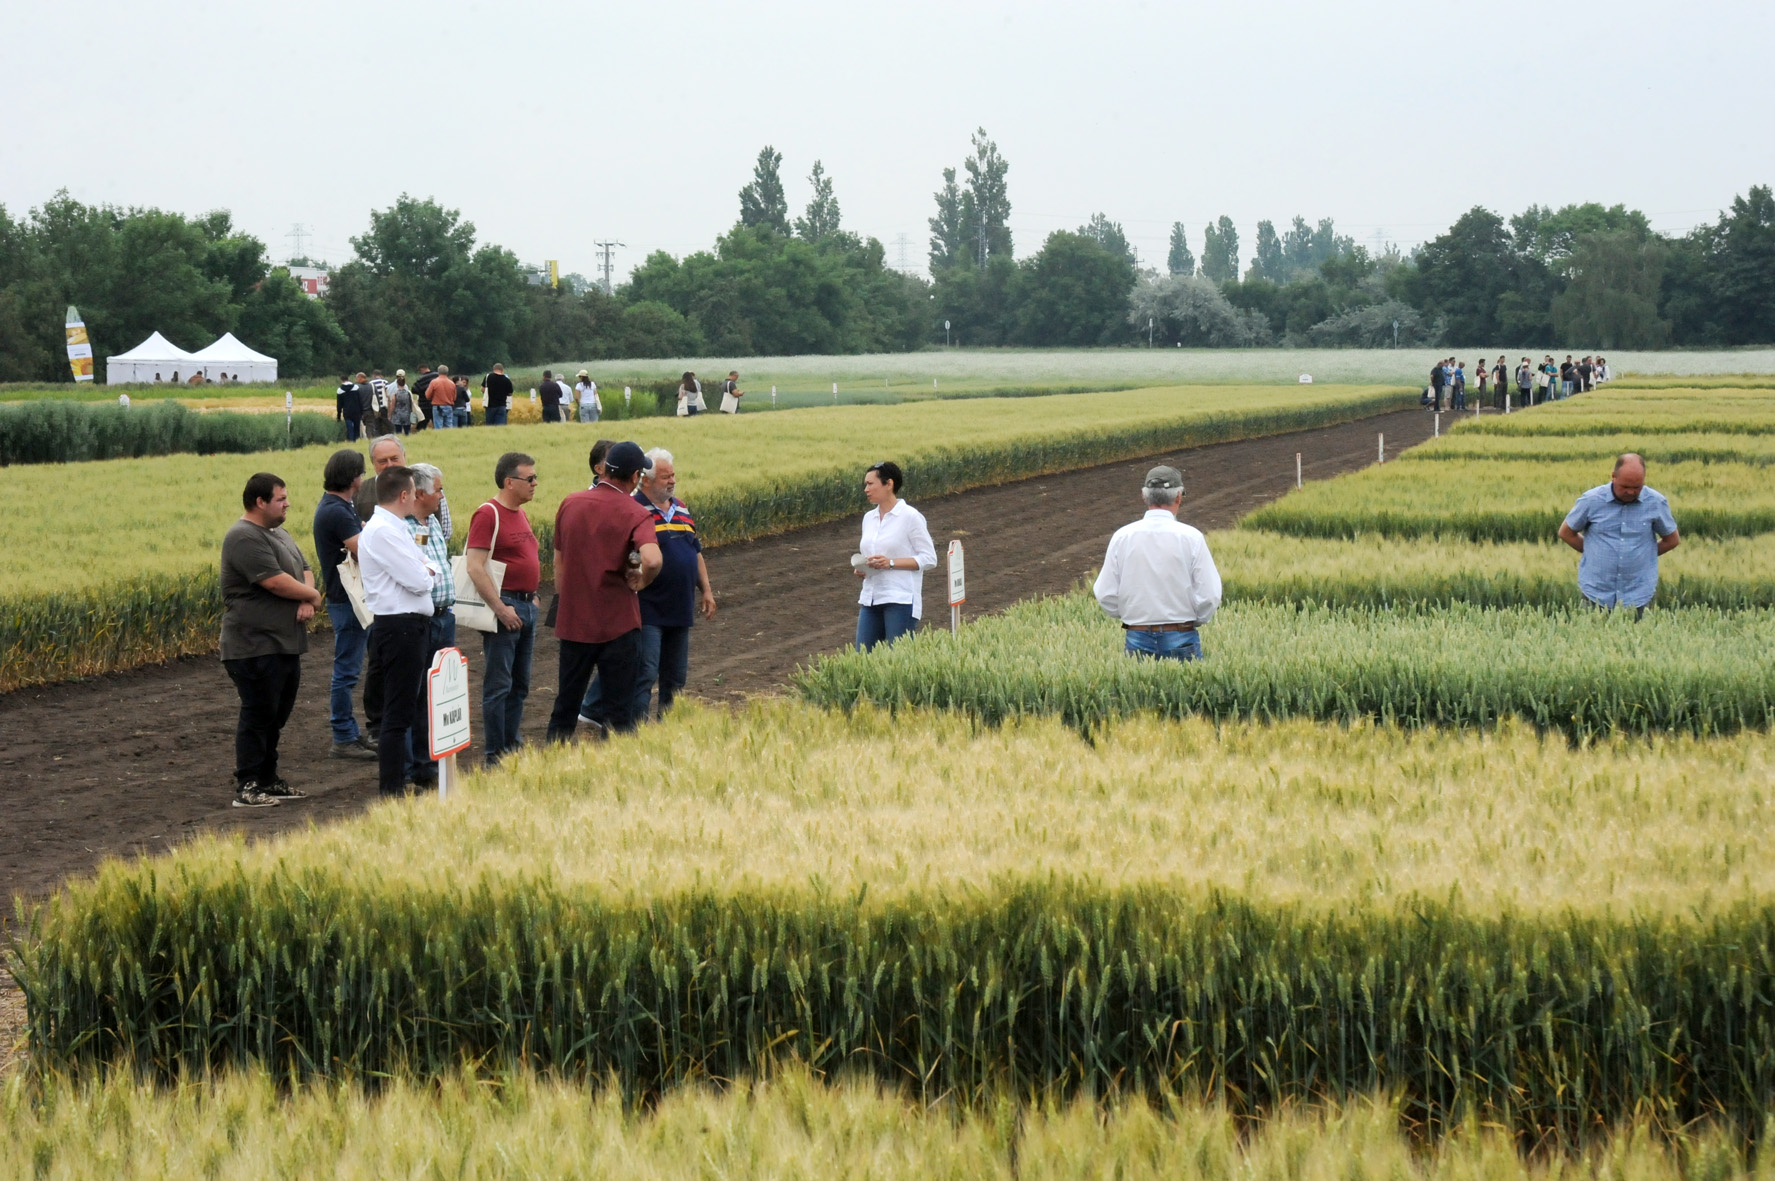 The Field Days event in Hungary